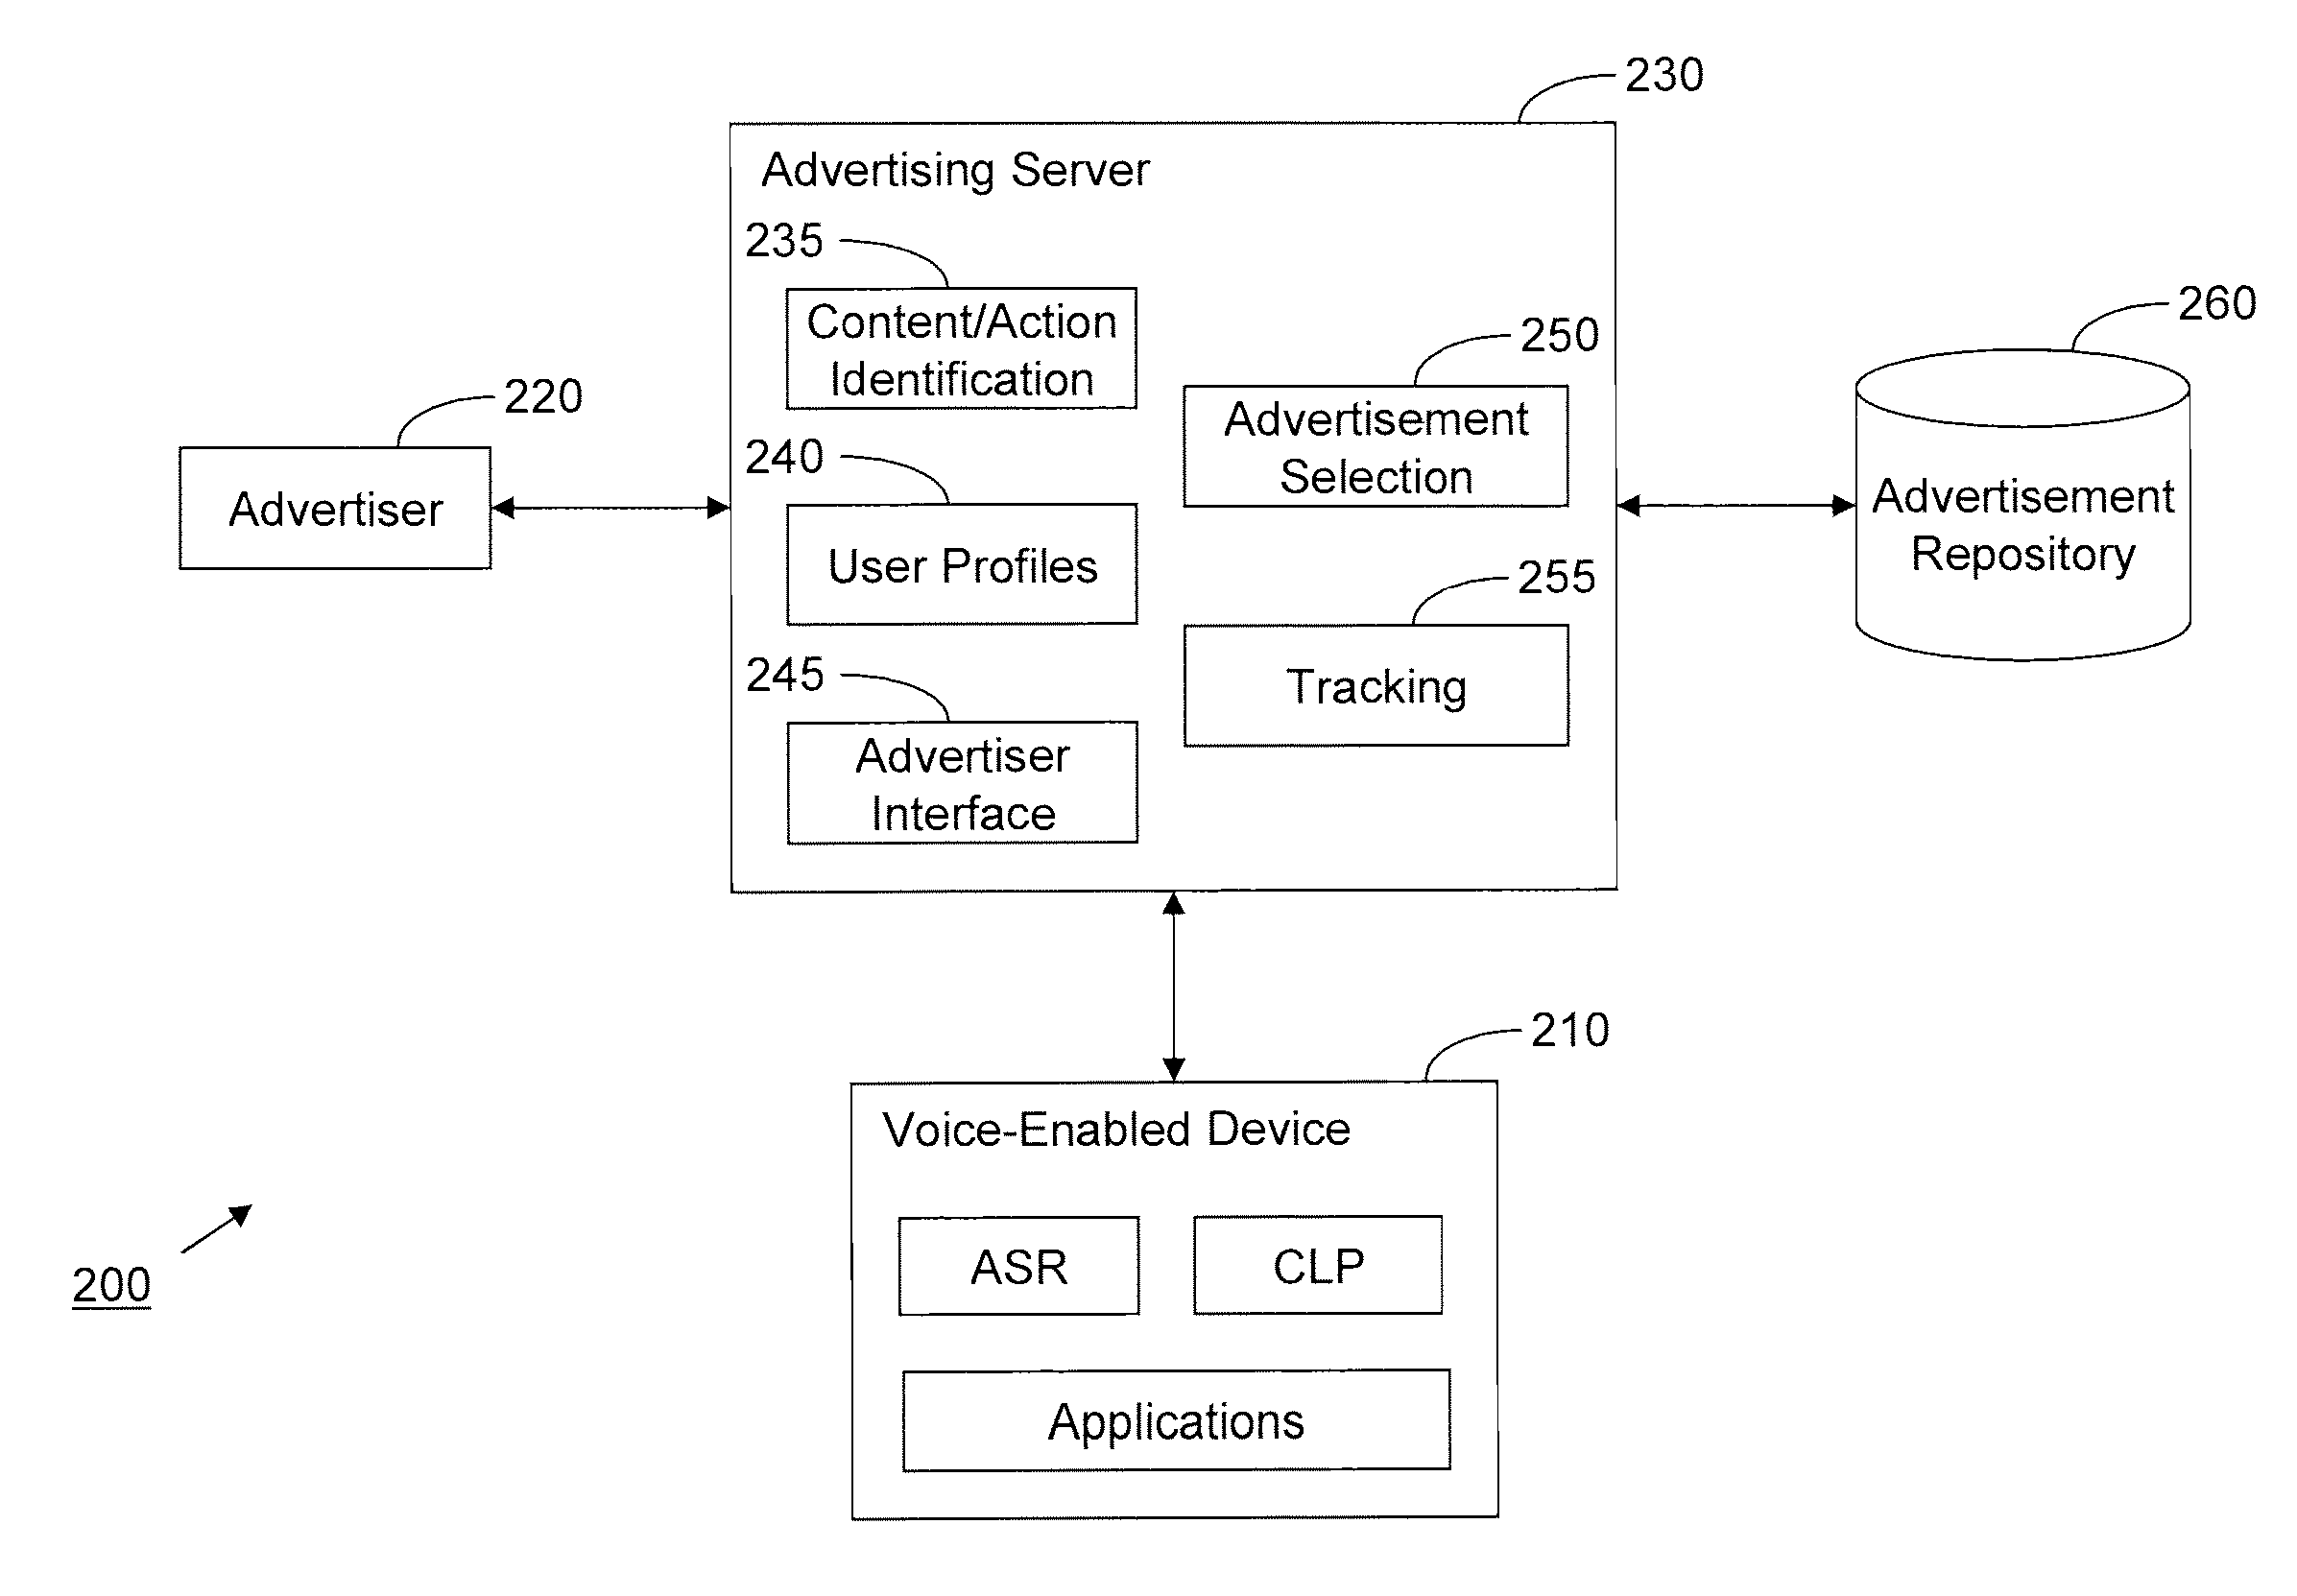 System and method for selecting and presenting advertisements based on natural language processing of voice-based input